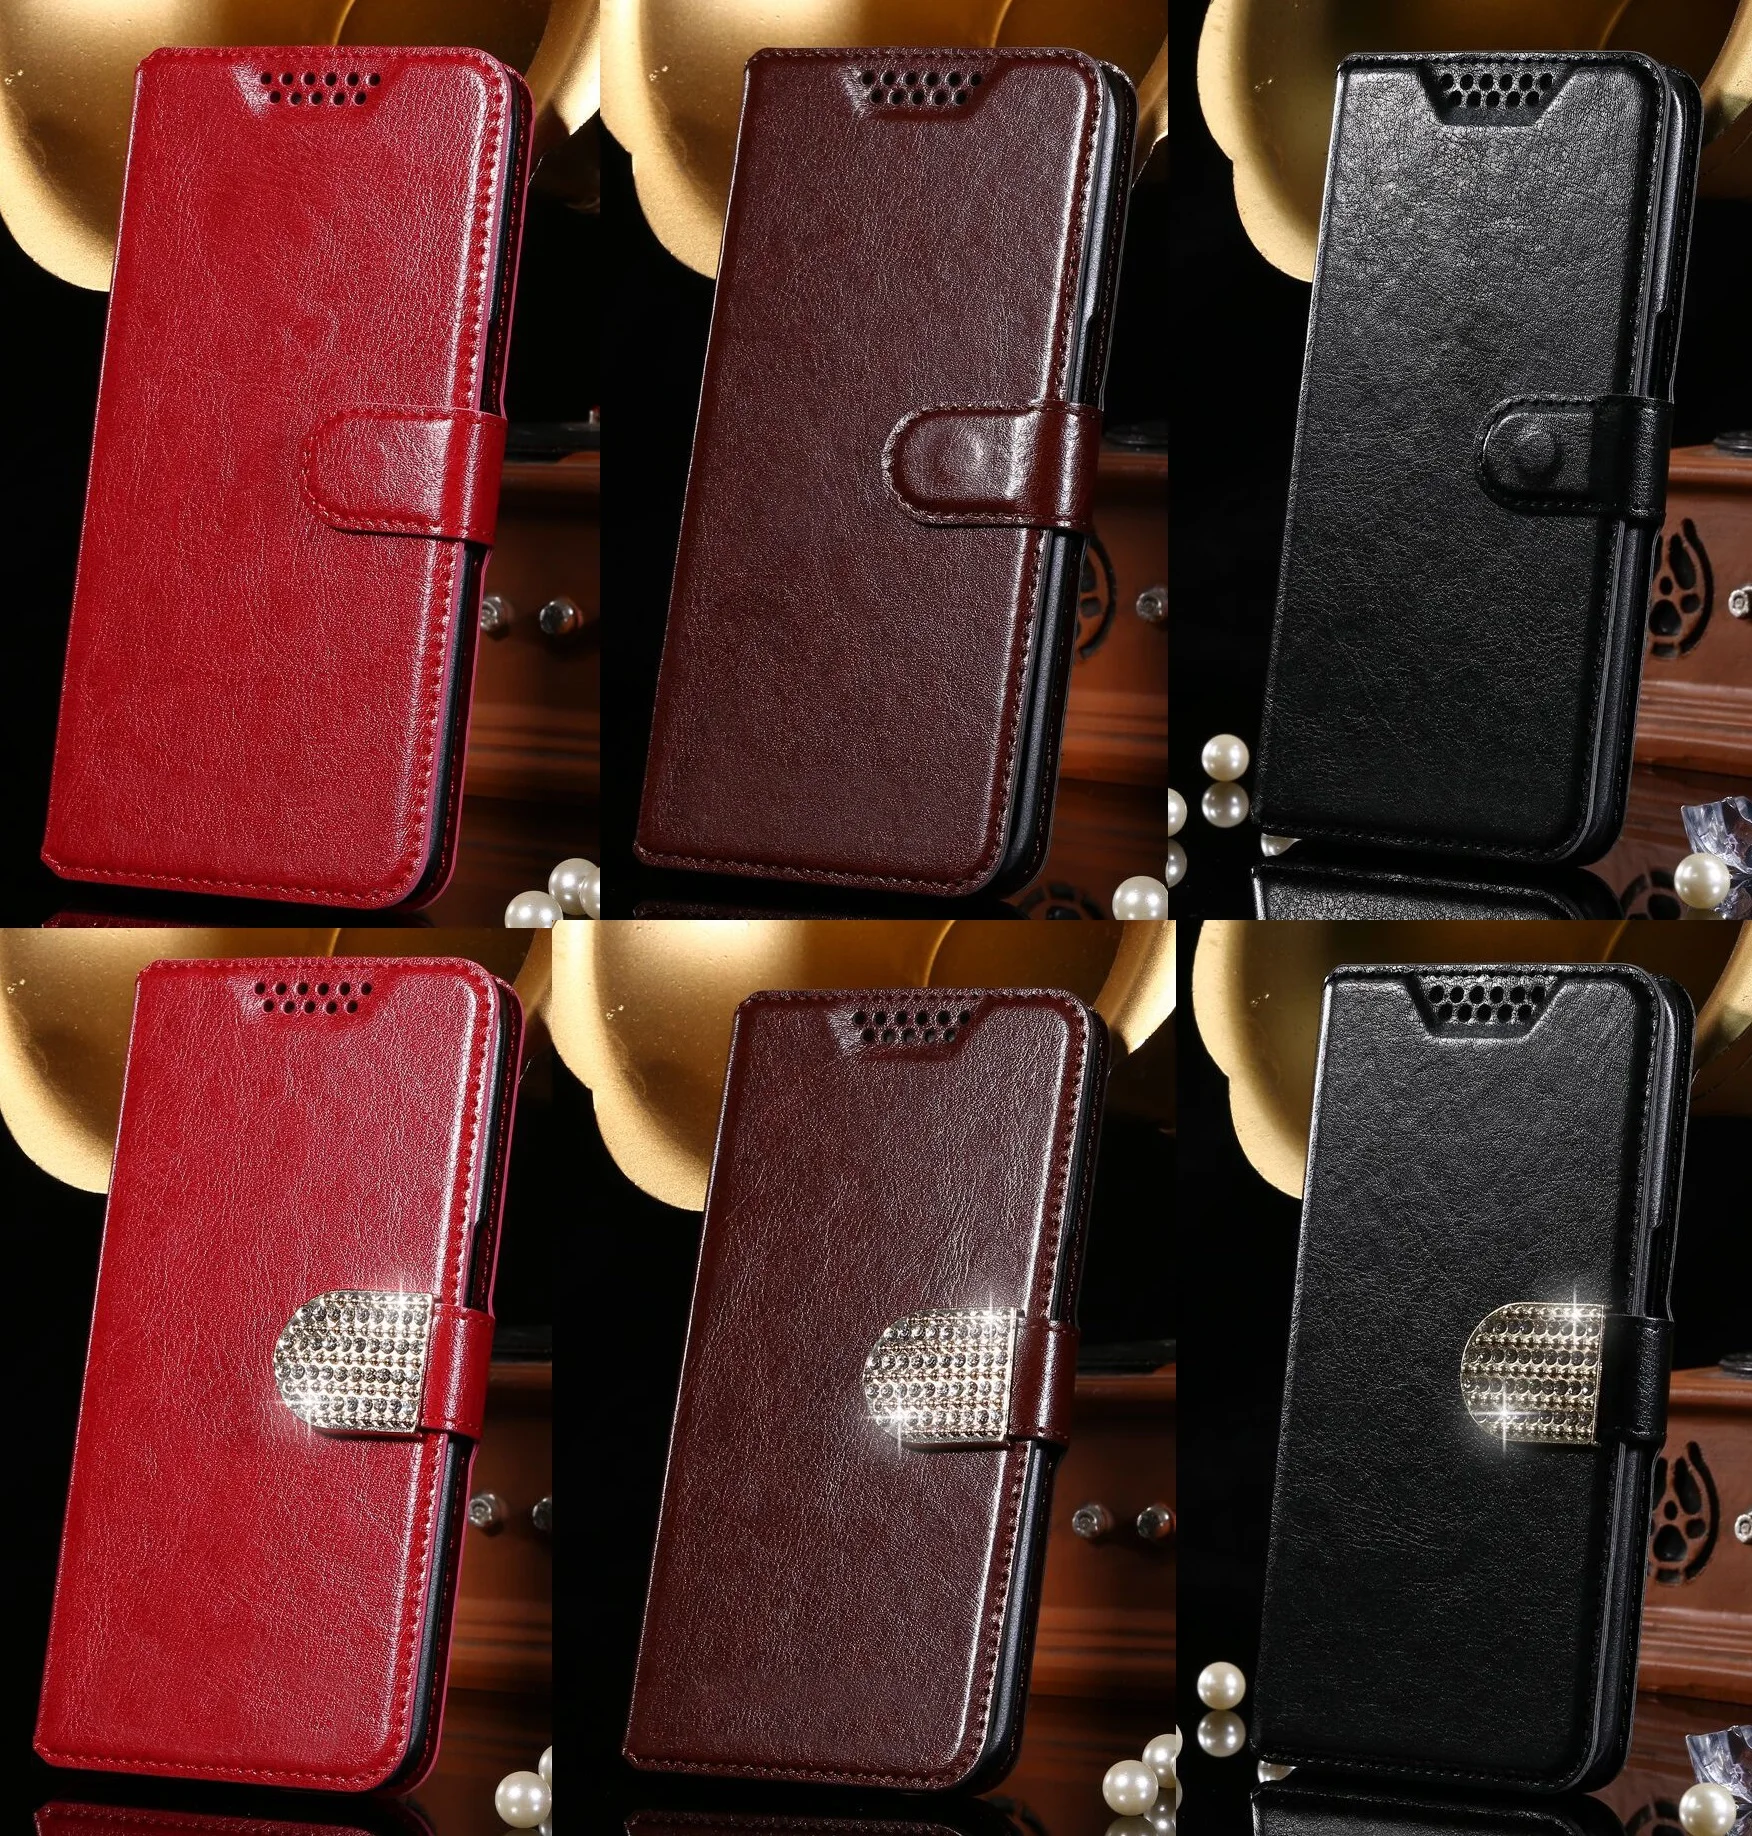 

Luxury Wallet PU Case Flip Leather Exclusive Cover Book Card Slots For BQ BQ-5521 Strike Power Max 5505 Amsterdam 4526 Fox